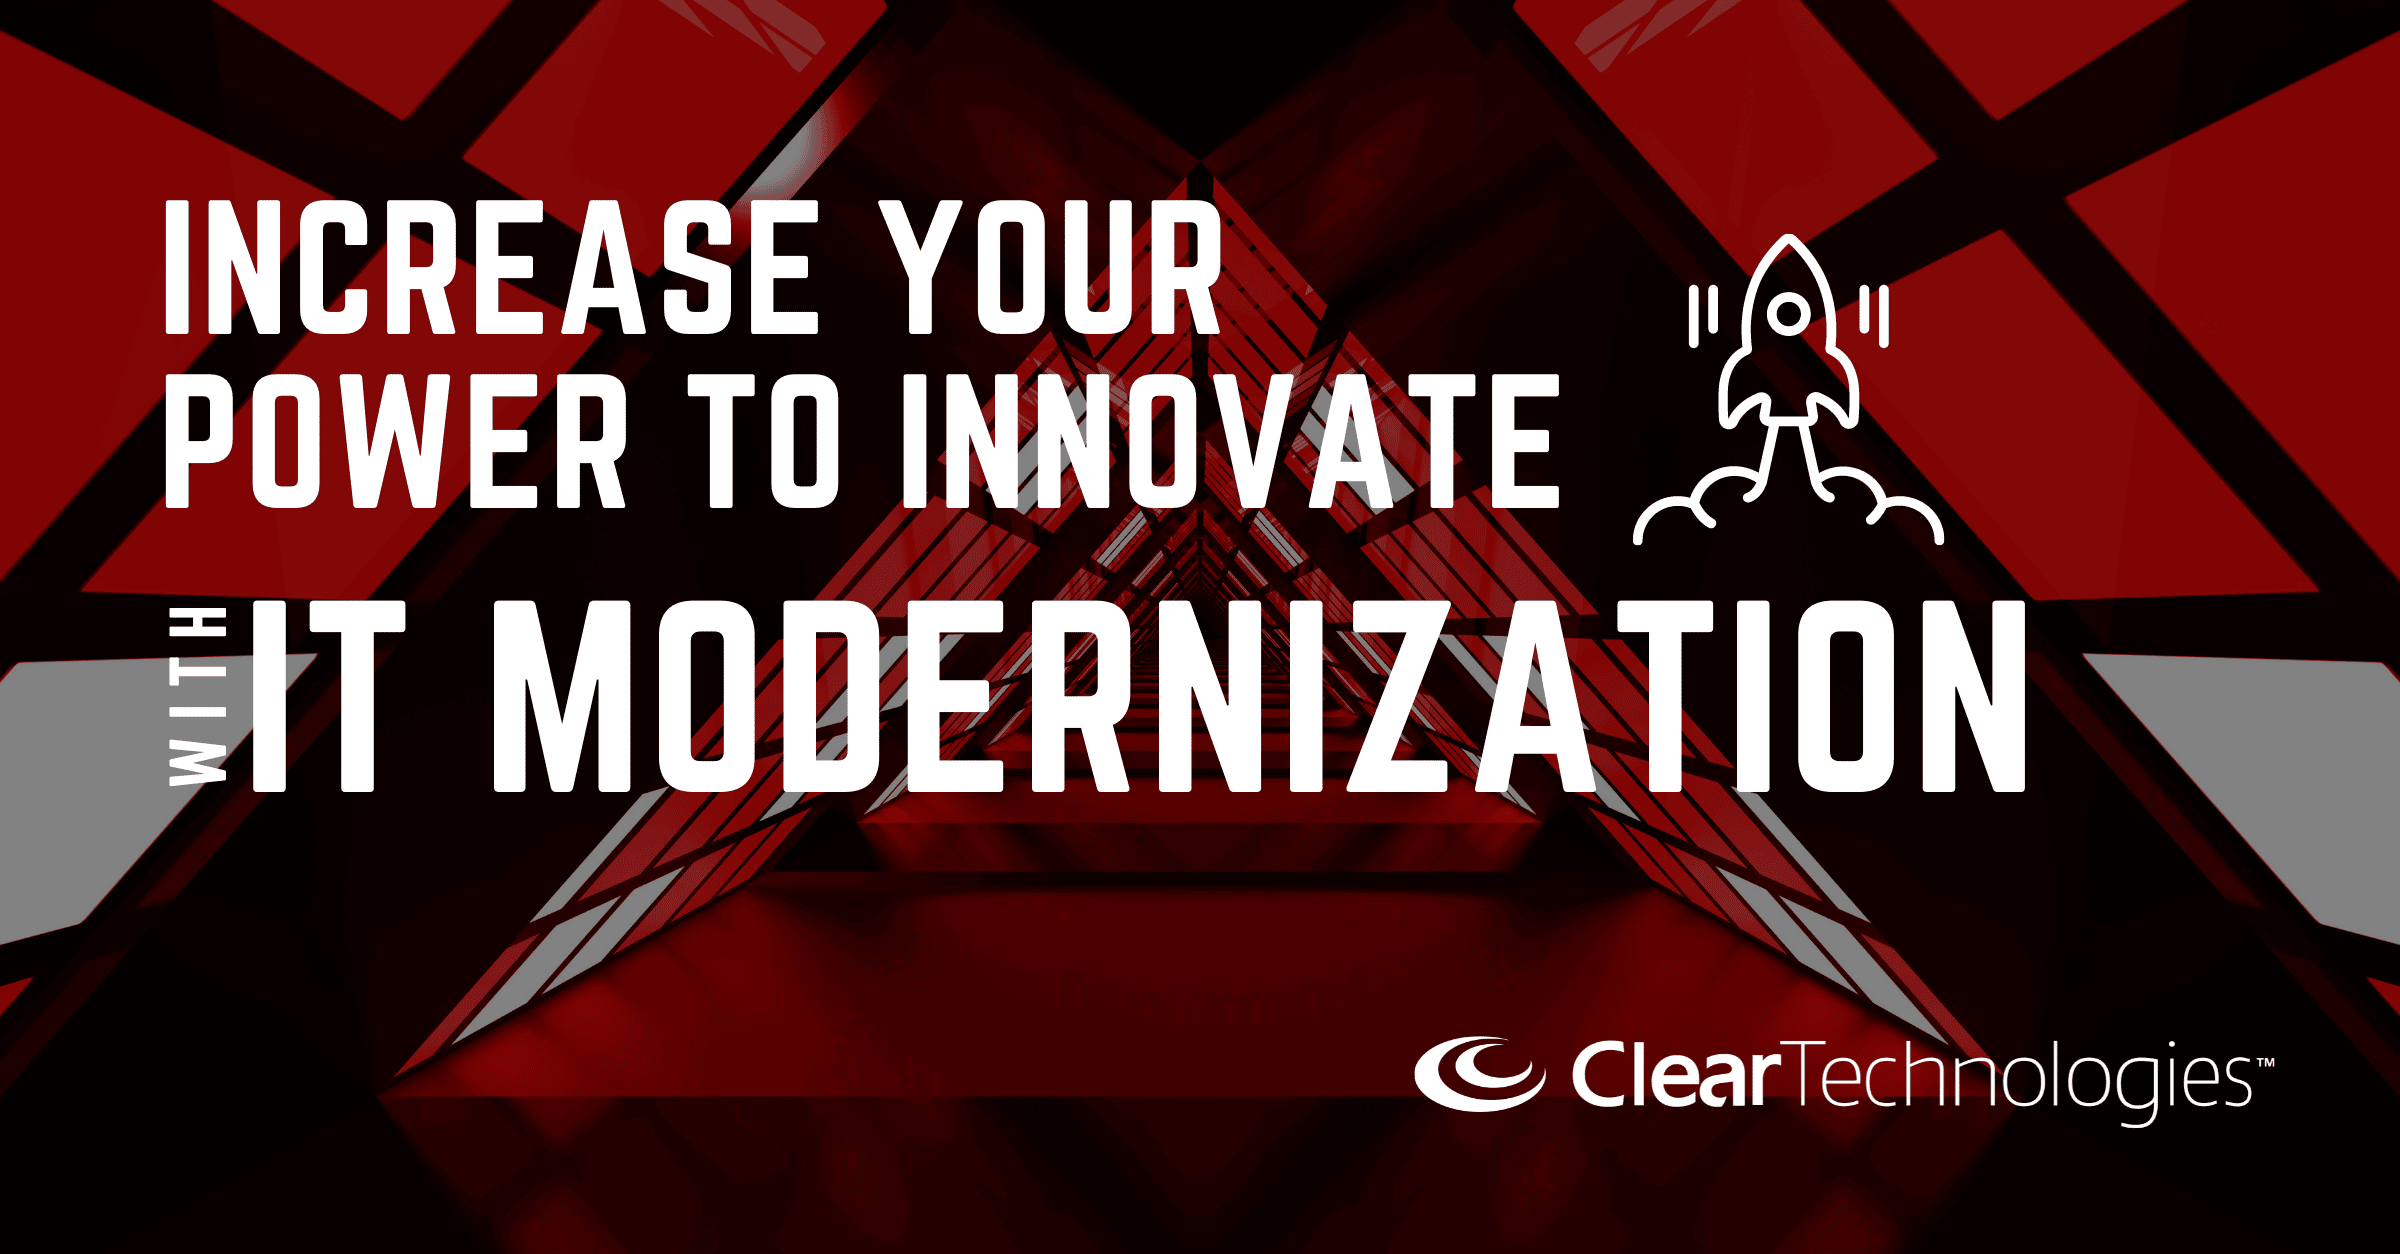 CLEAR TECHNOLOGIES | Increase Your Power to Innovate with IT Modernization